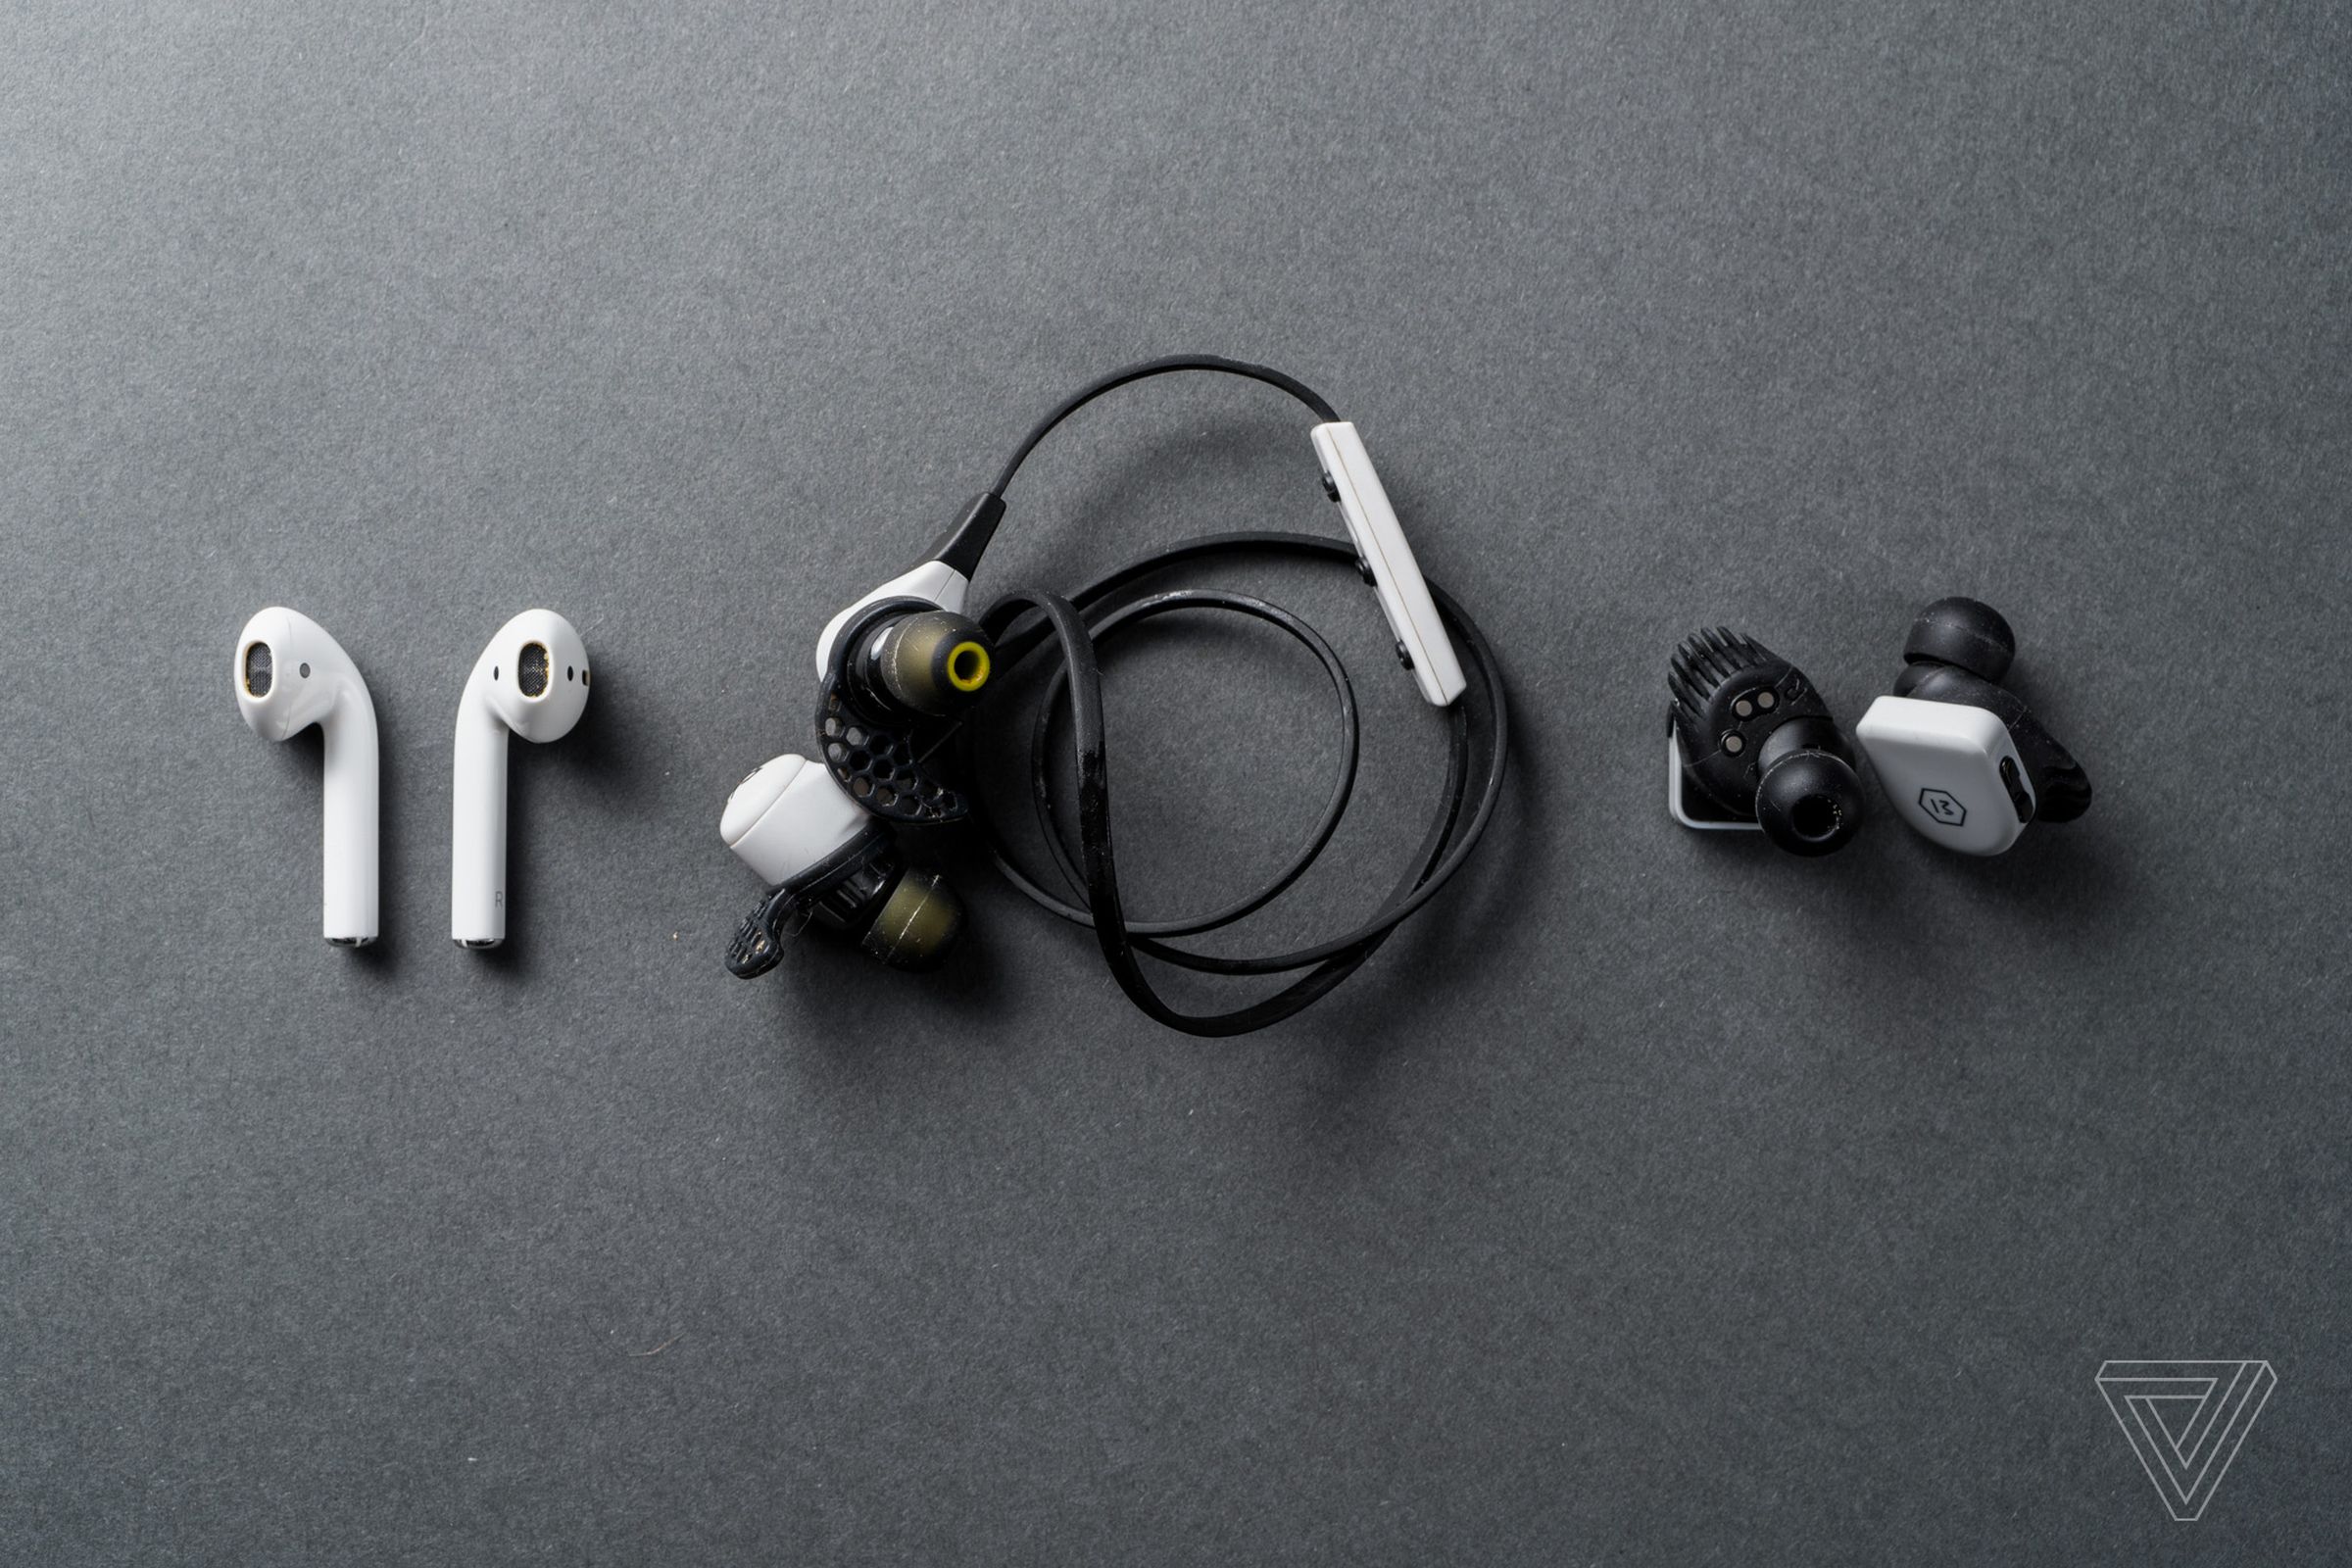 Different types of earbuds may require slightly different approaches and tools.